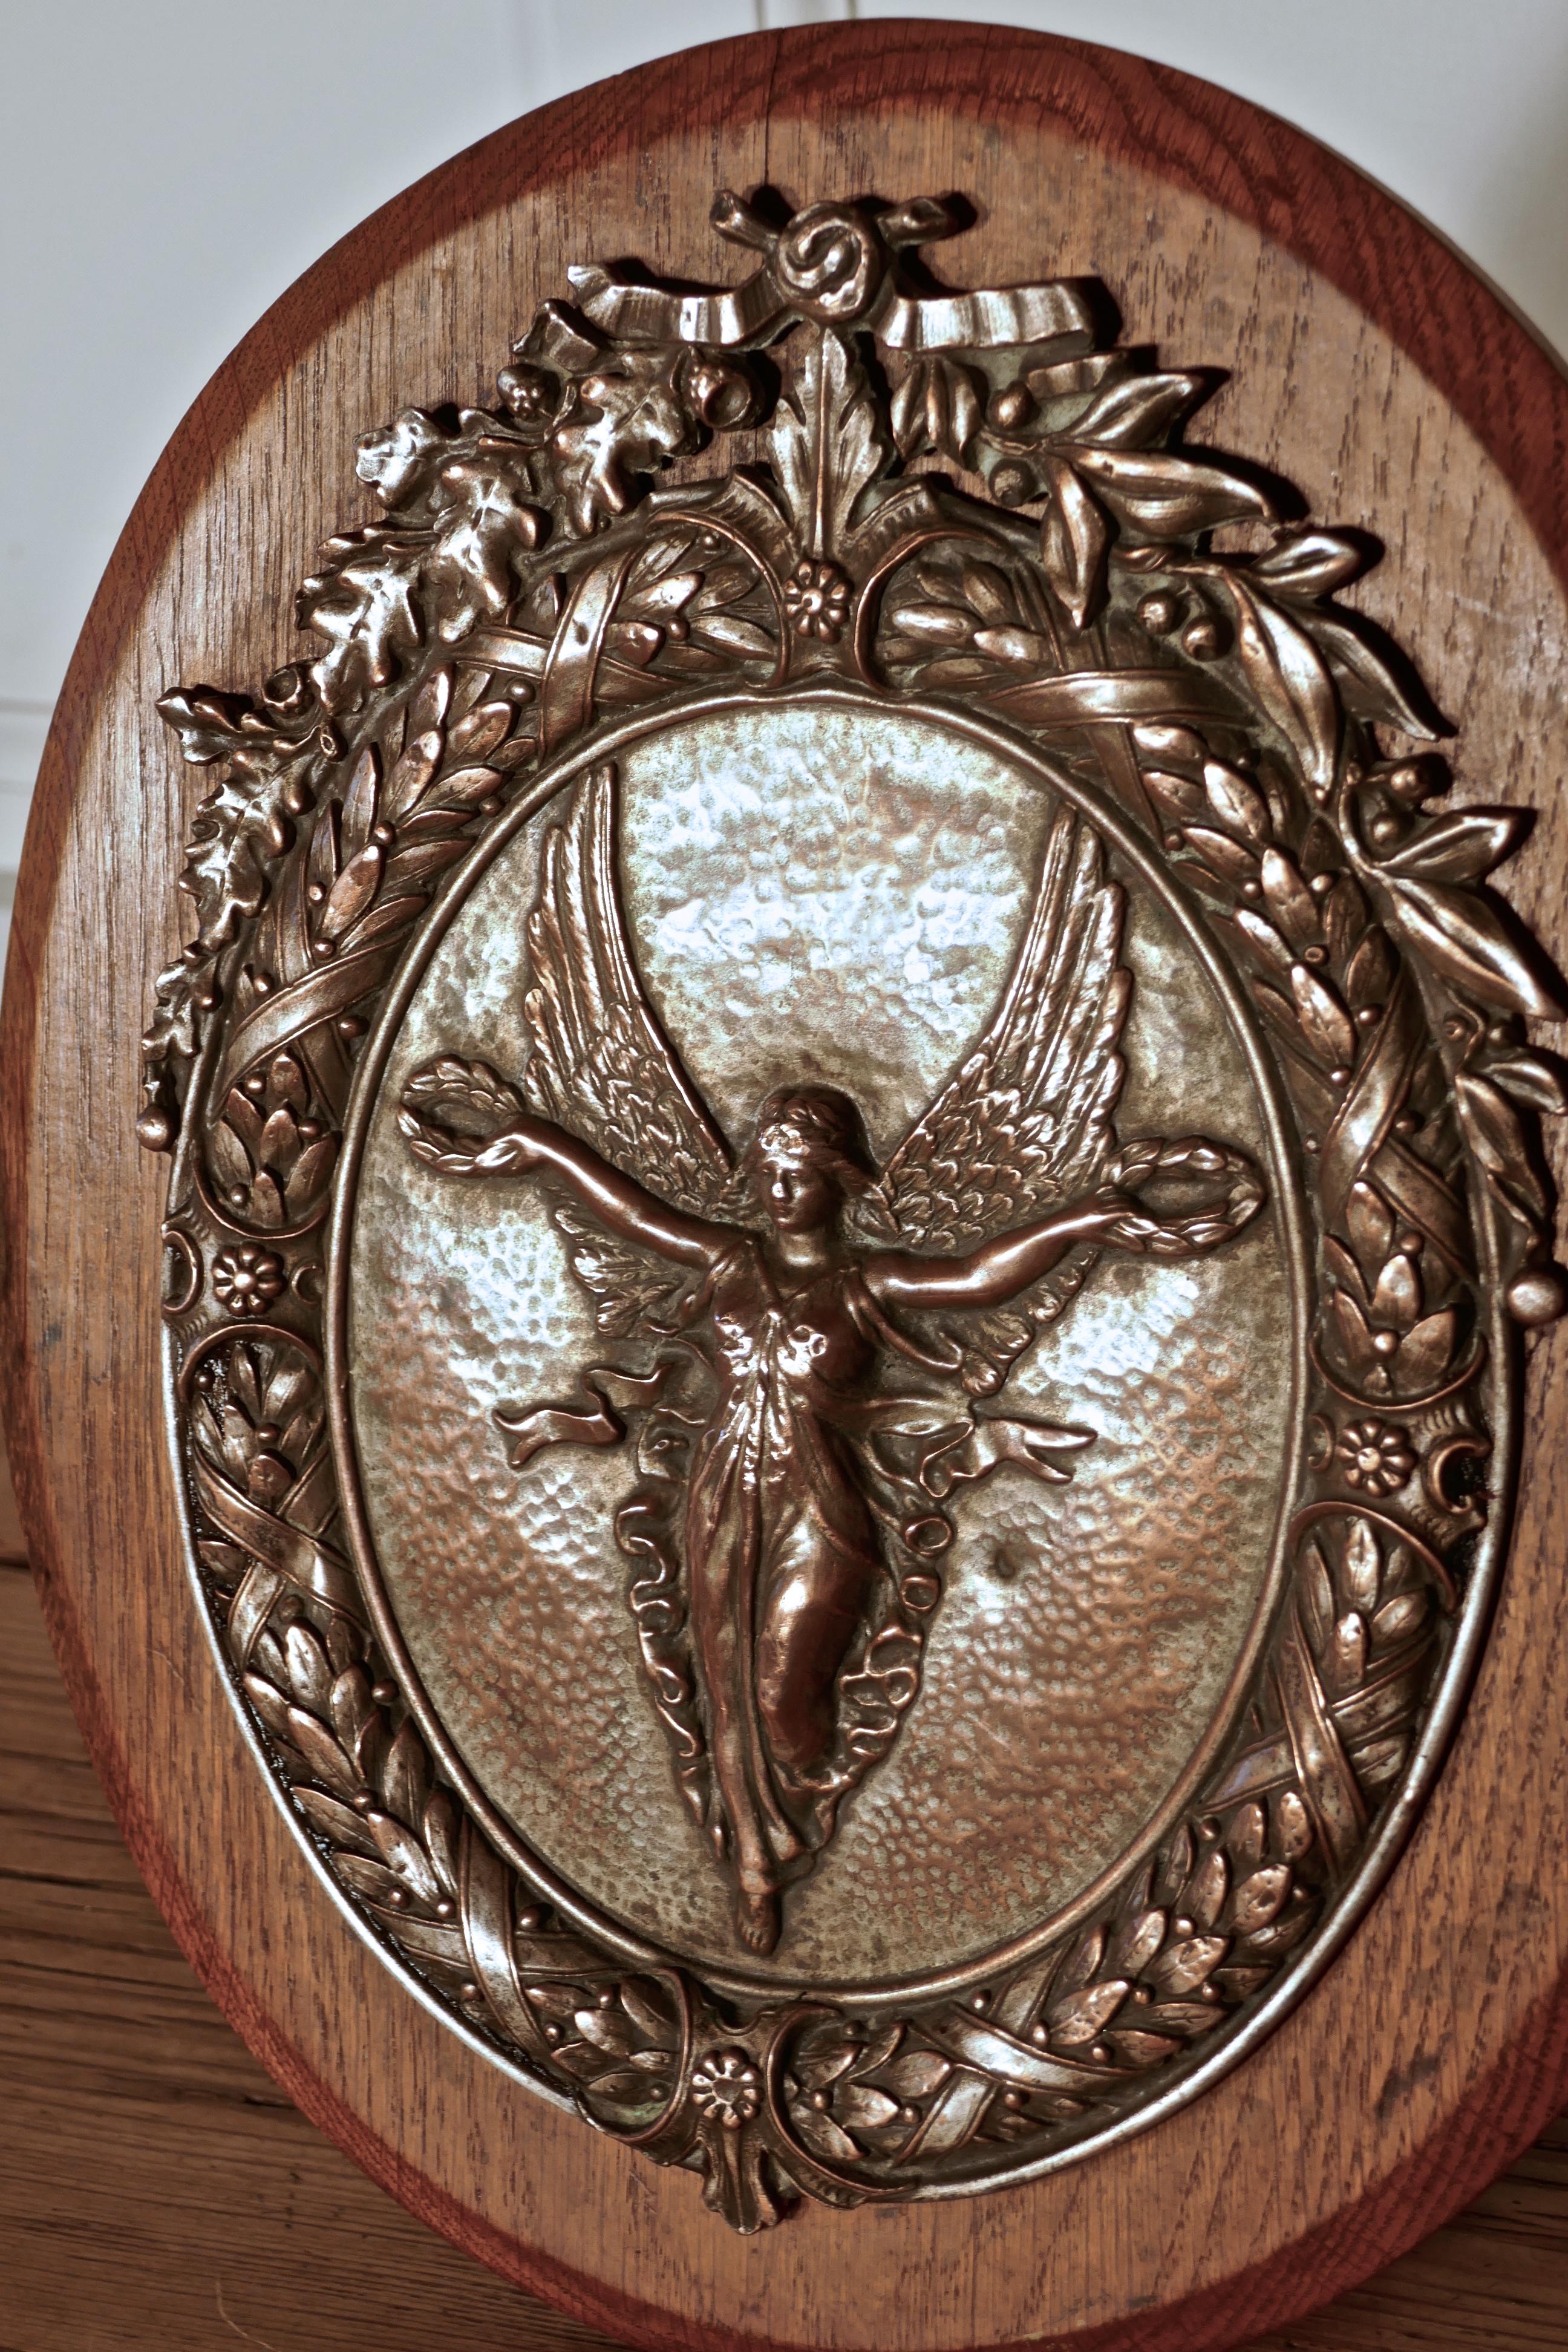 Arts and Crafts 19th Century Shield Trophy with Nike the Goddess of Victory 

The is an Arts and Crafts piece, the Oval Oak shield has an embossed Coper plated mount, in the centre there is an oval cartouche with the Nike the Winged Greek Goddess